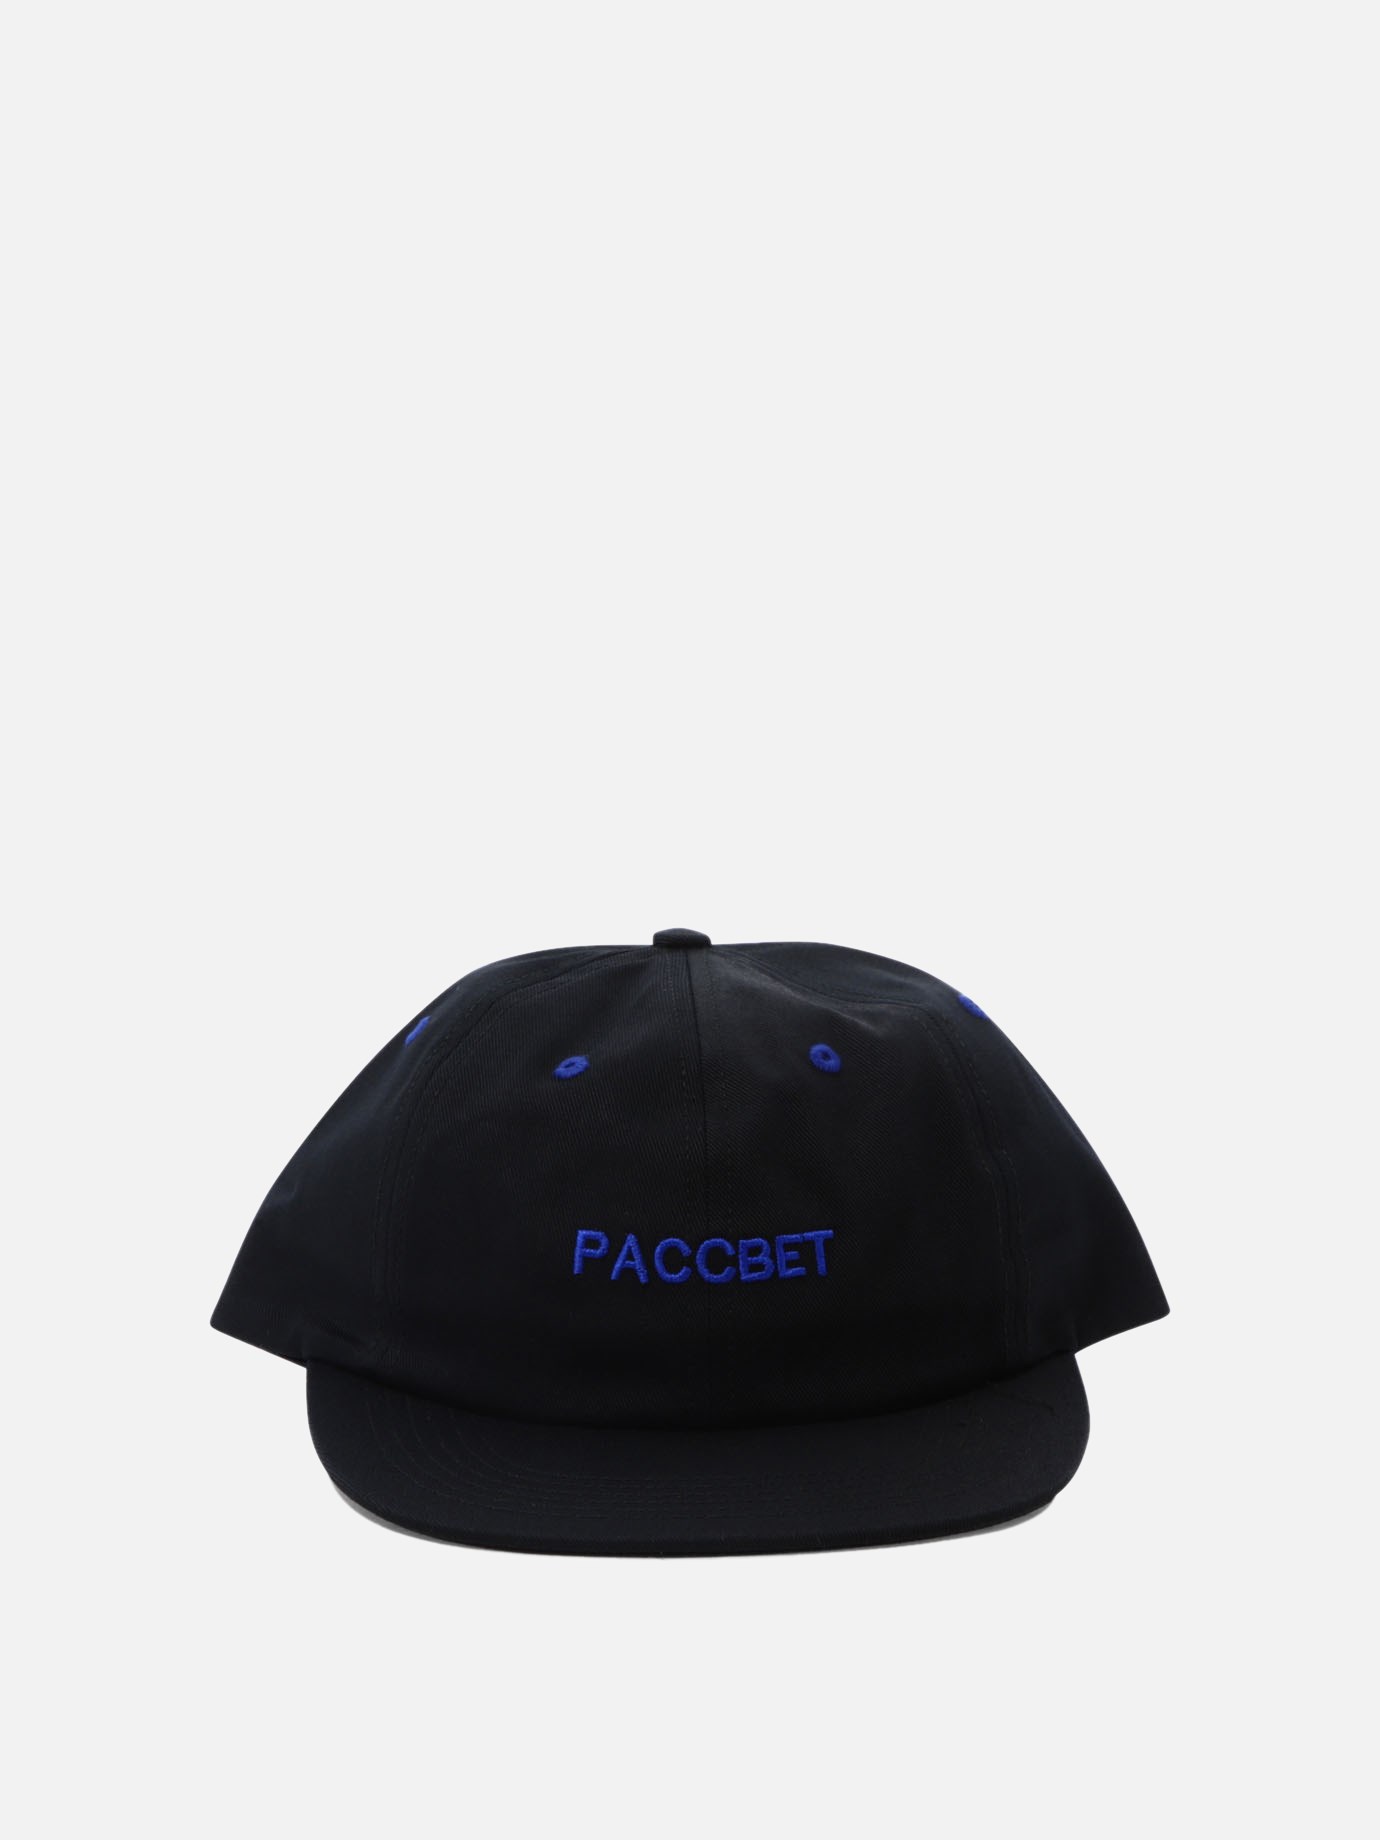 Cappello trucker  Paccbet by Paccbet - 0